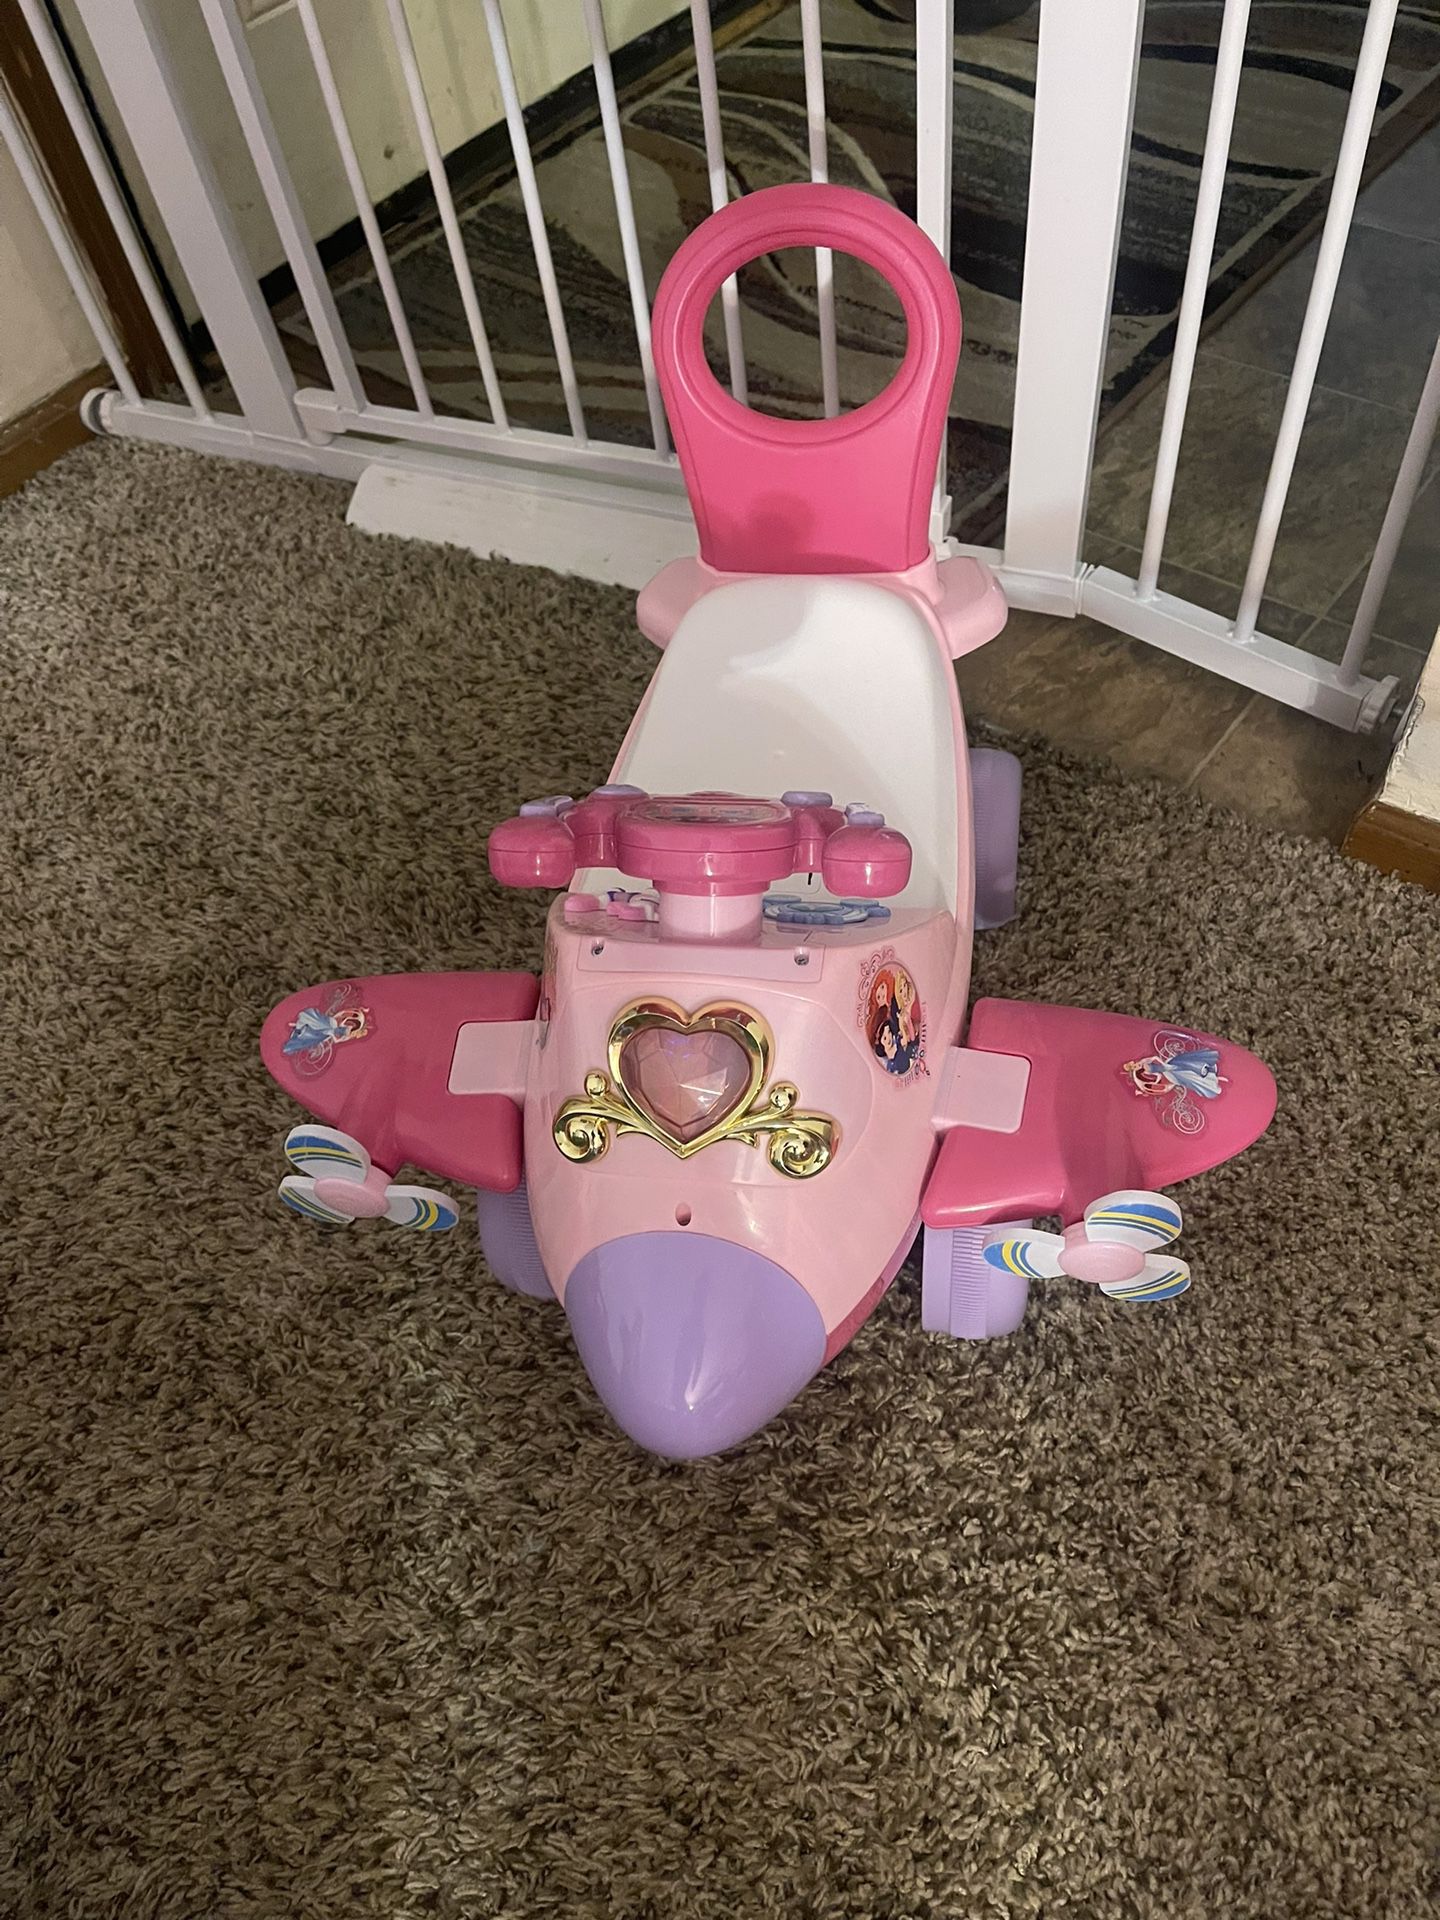 Princess Airplane Ride On For Toddler